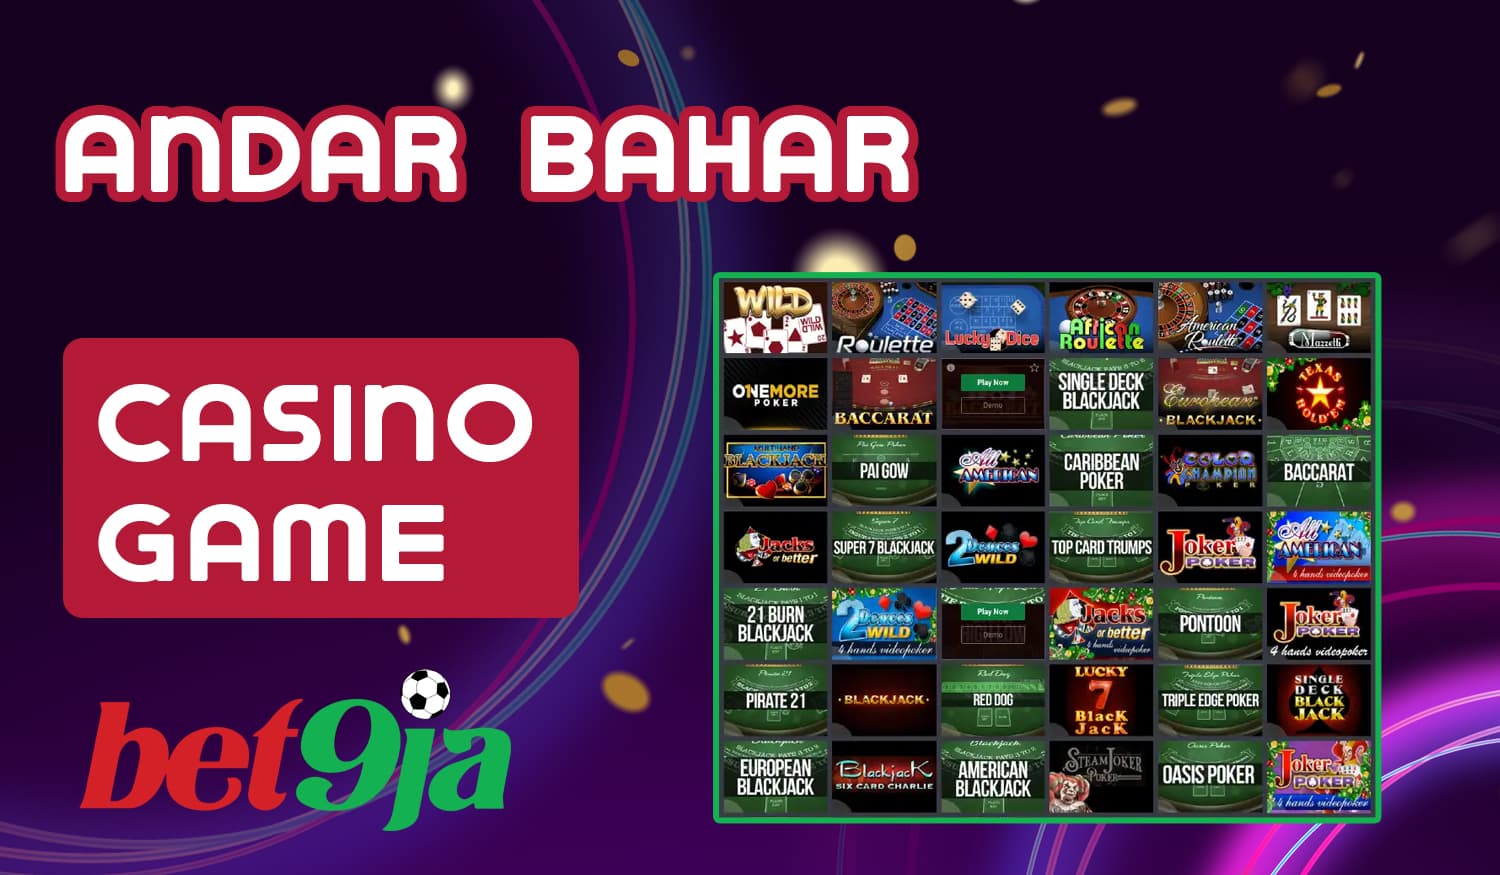 Which online casino games other than andar bahar are available on Bet9ja casino